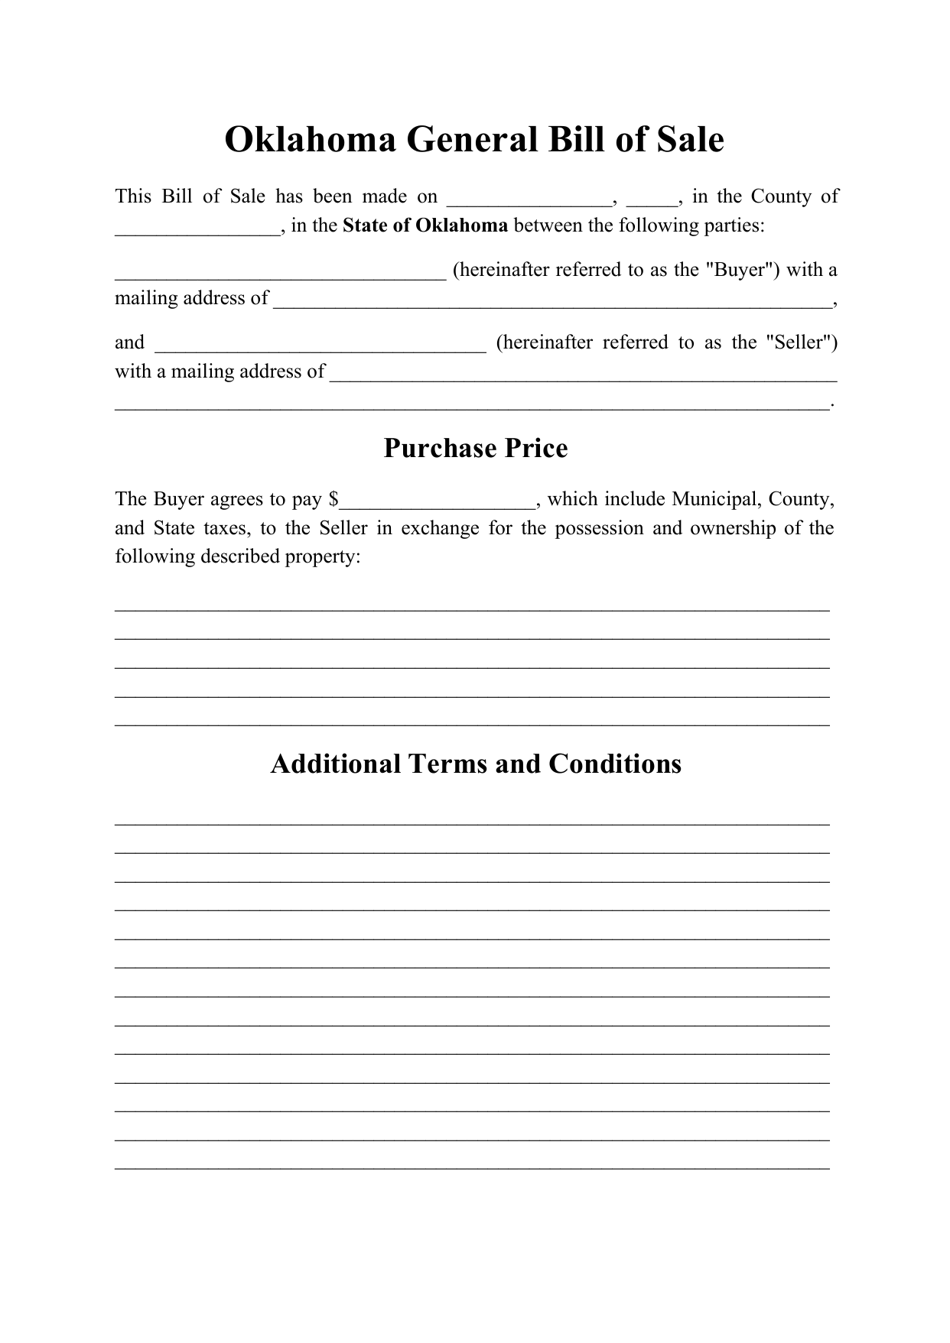 oklahoma-generic-bill-of-sale-form-fill-out-sign-online-and-download-pdf-templateroller